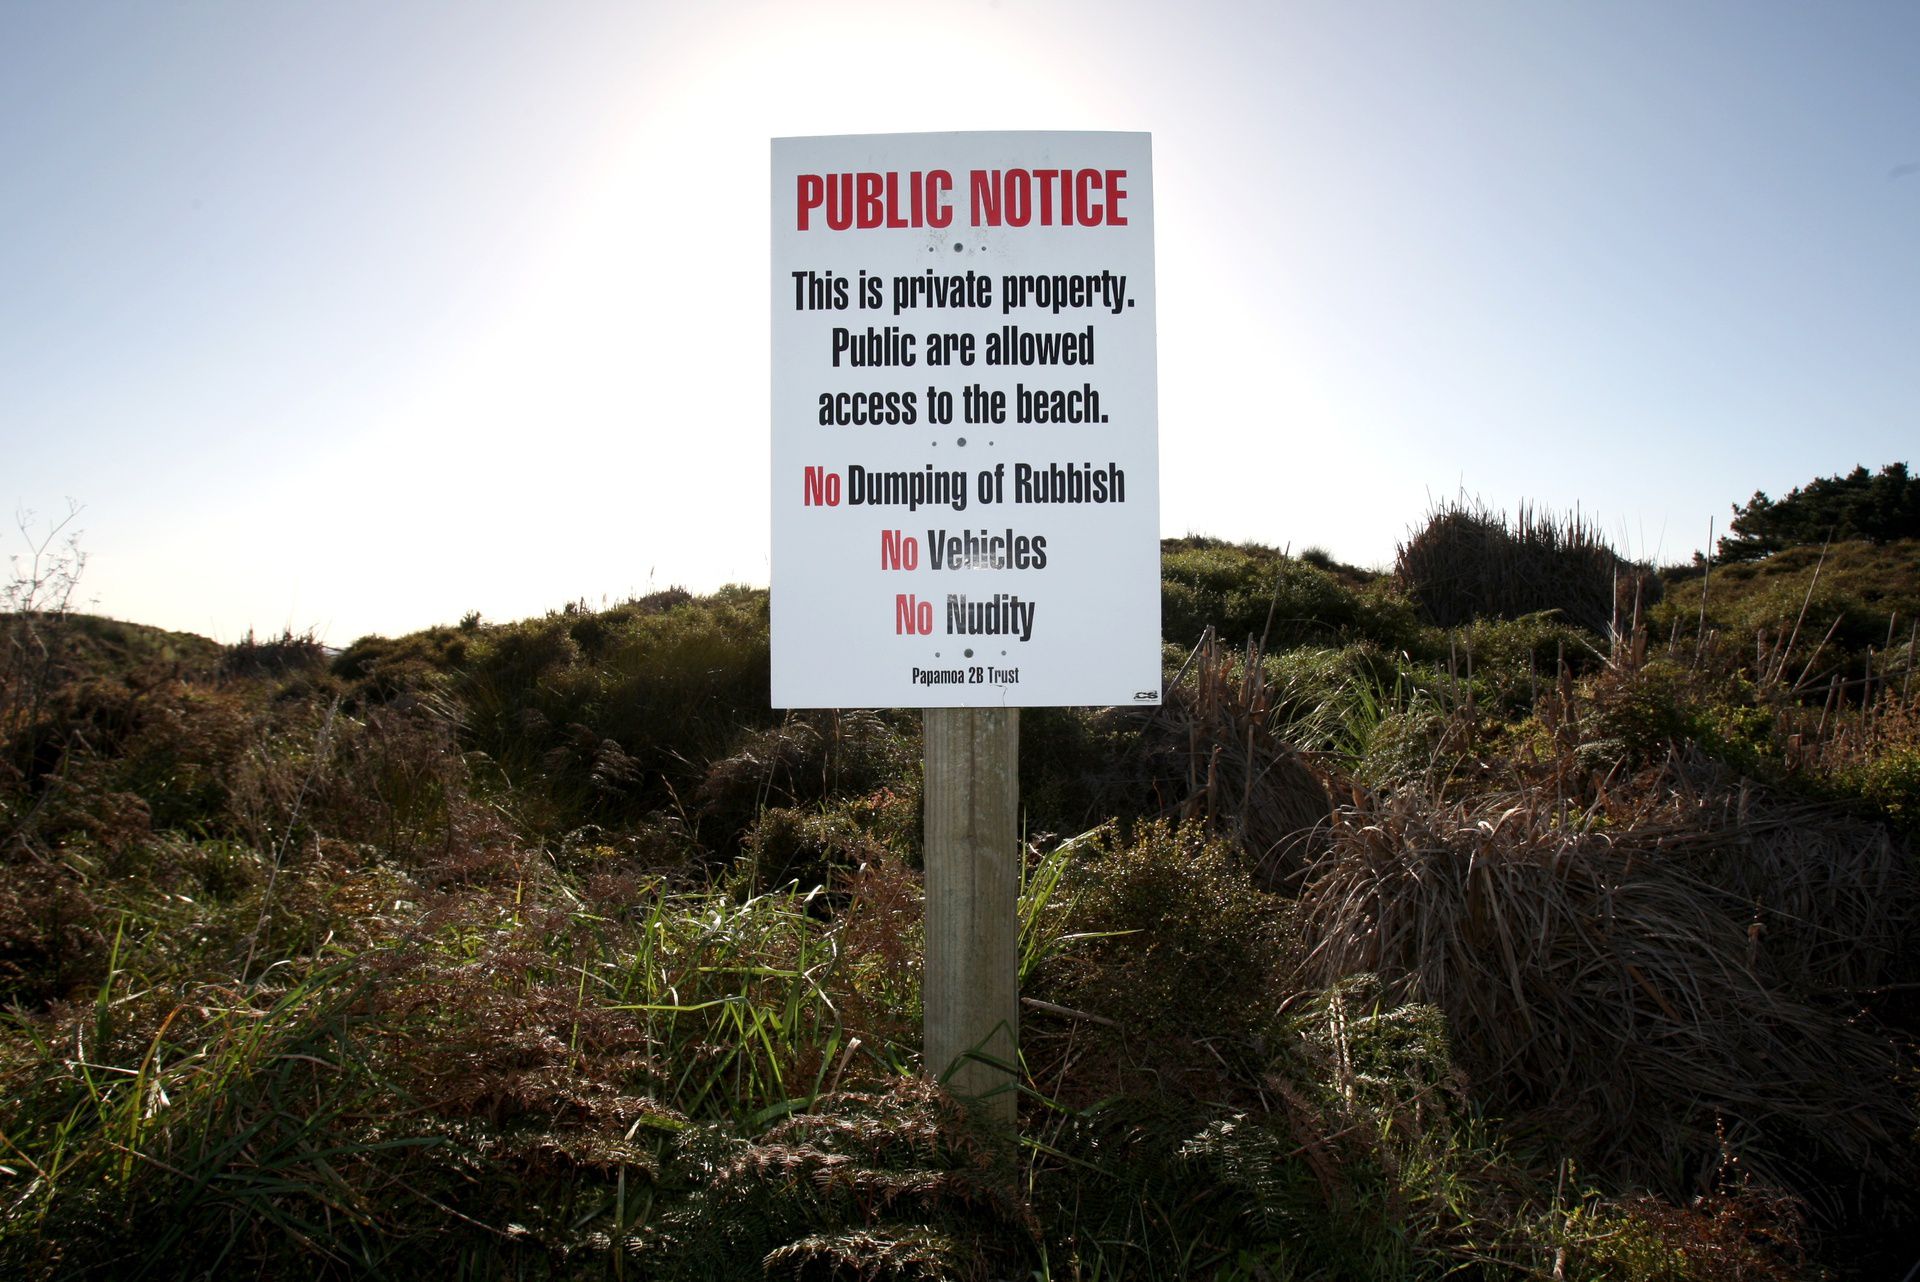 Beach Nudist Couple Erections - Dawn Picken: Bodies are beautiful - why do some of us have trouble with  public nudity? - NZ Herald